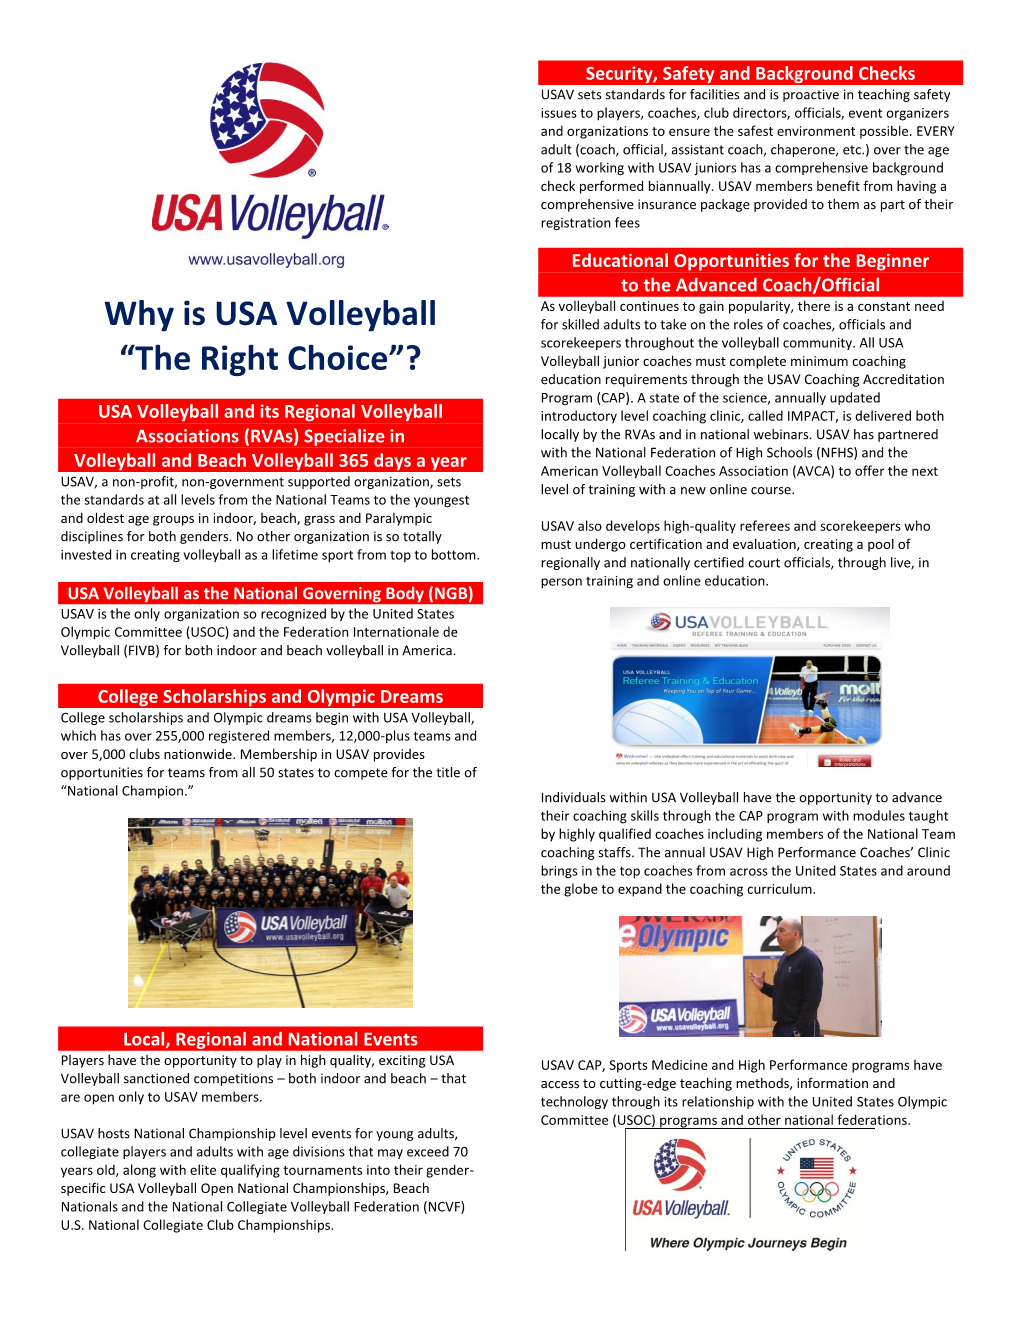 Why Is USA Volleyball “The Right Choice”?